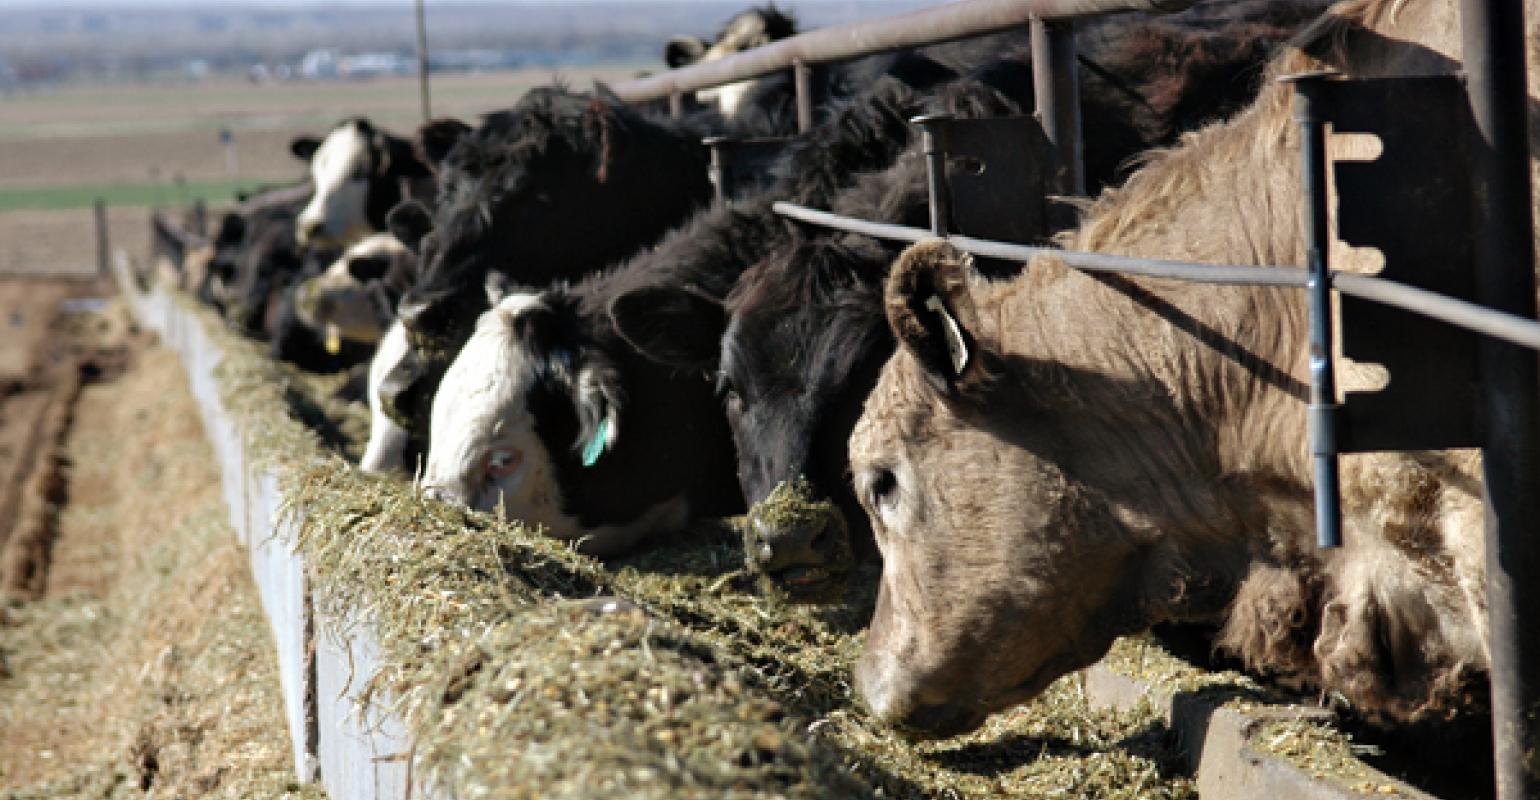 Katelyn McCullock says Fourth Quarter Cattle Prices are Contraseasonal